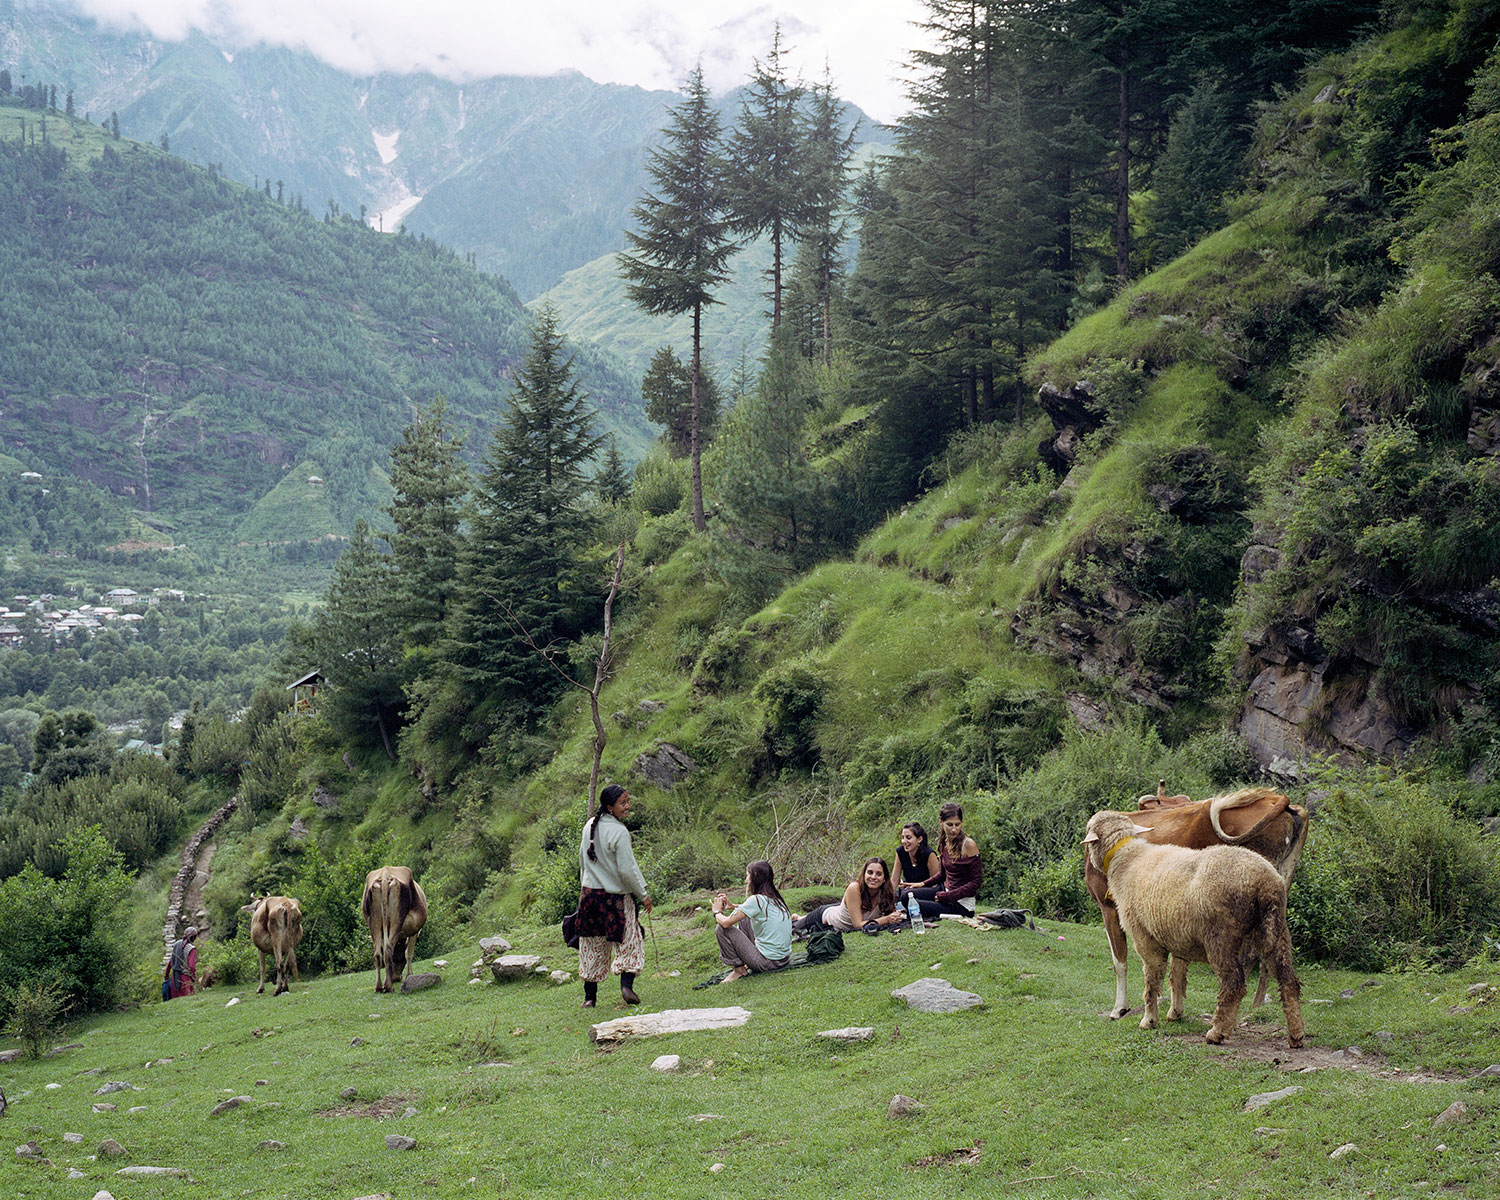 Four Israeli backpackers watch local women guide their animals down the mountain in Vashisht, India, August 2007.